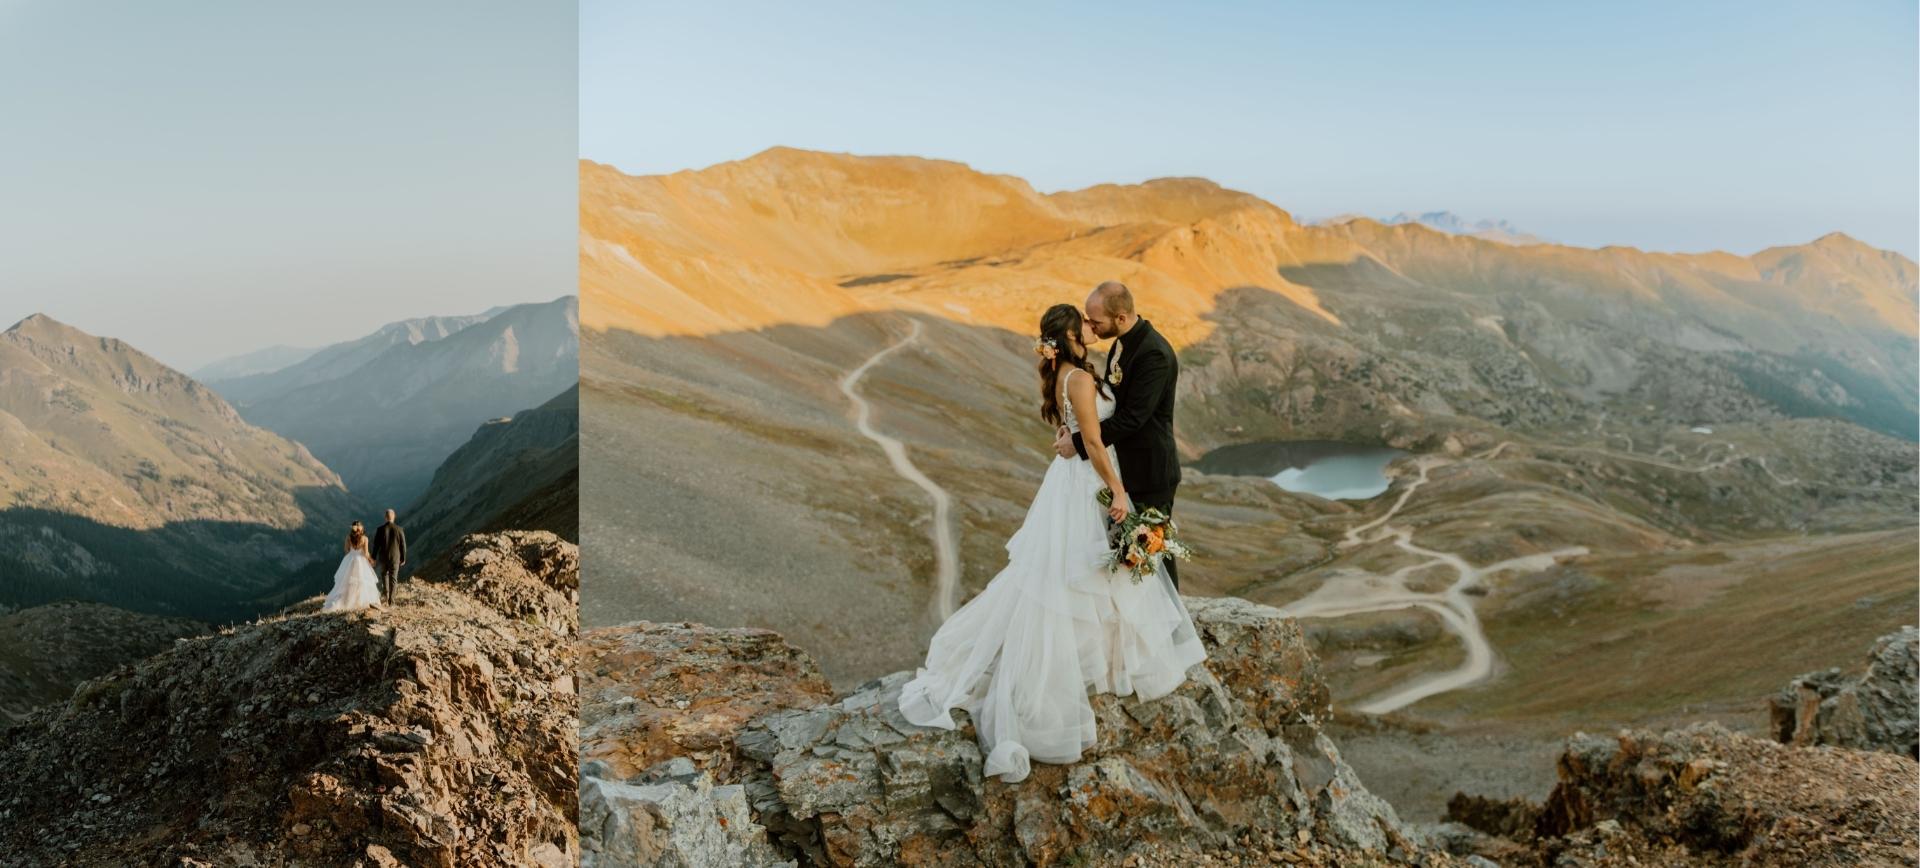 off-road mountain elopement in colorado -bride and groom at their wedding day enjoying their adventure wedding package